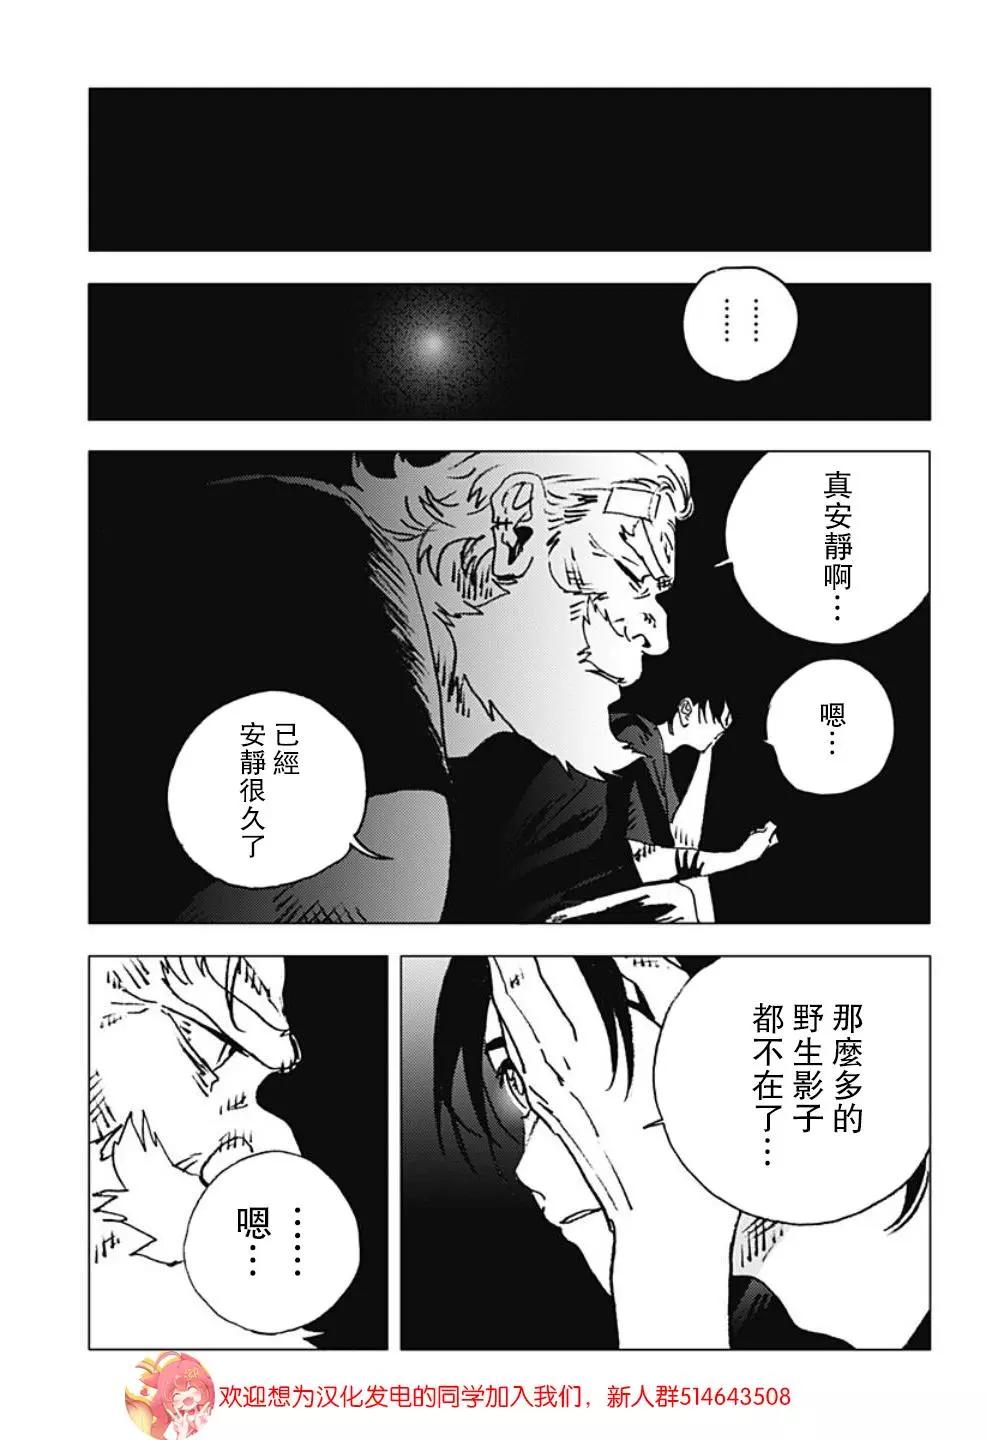 Summer time rendering - 第116話 - 3